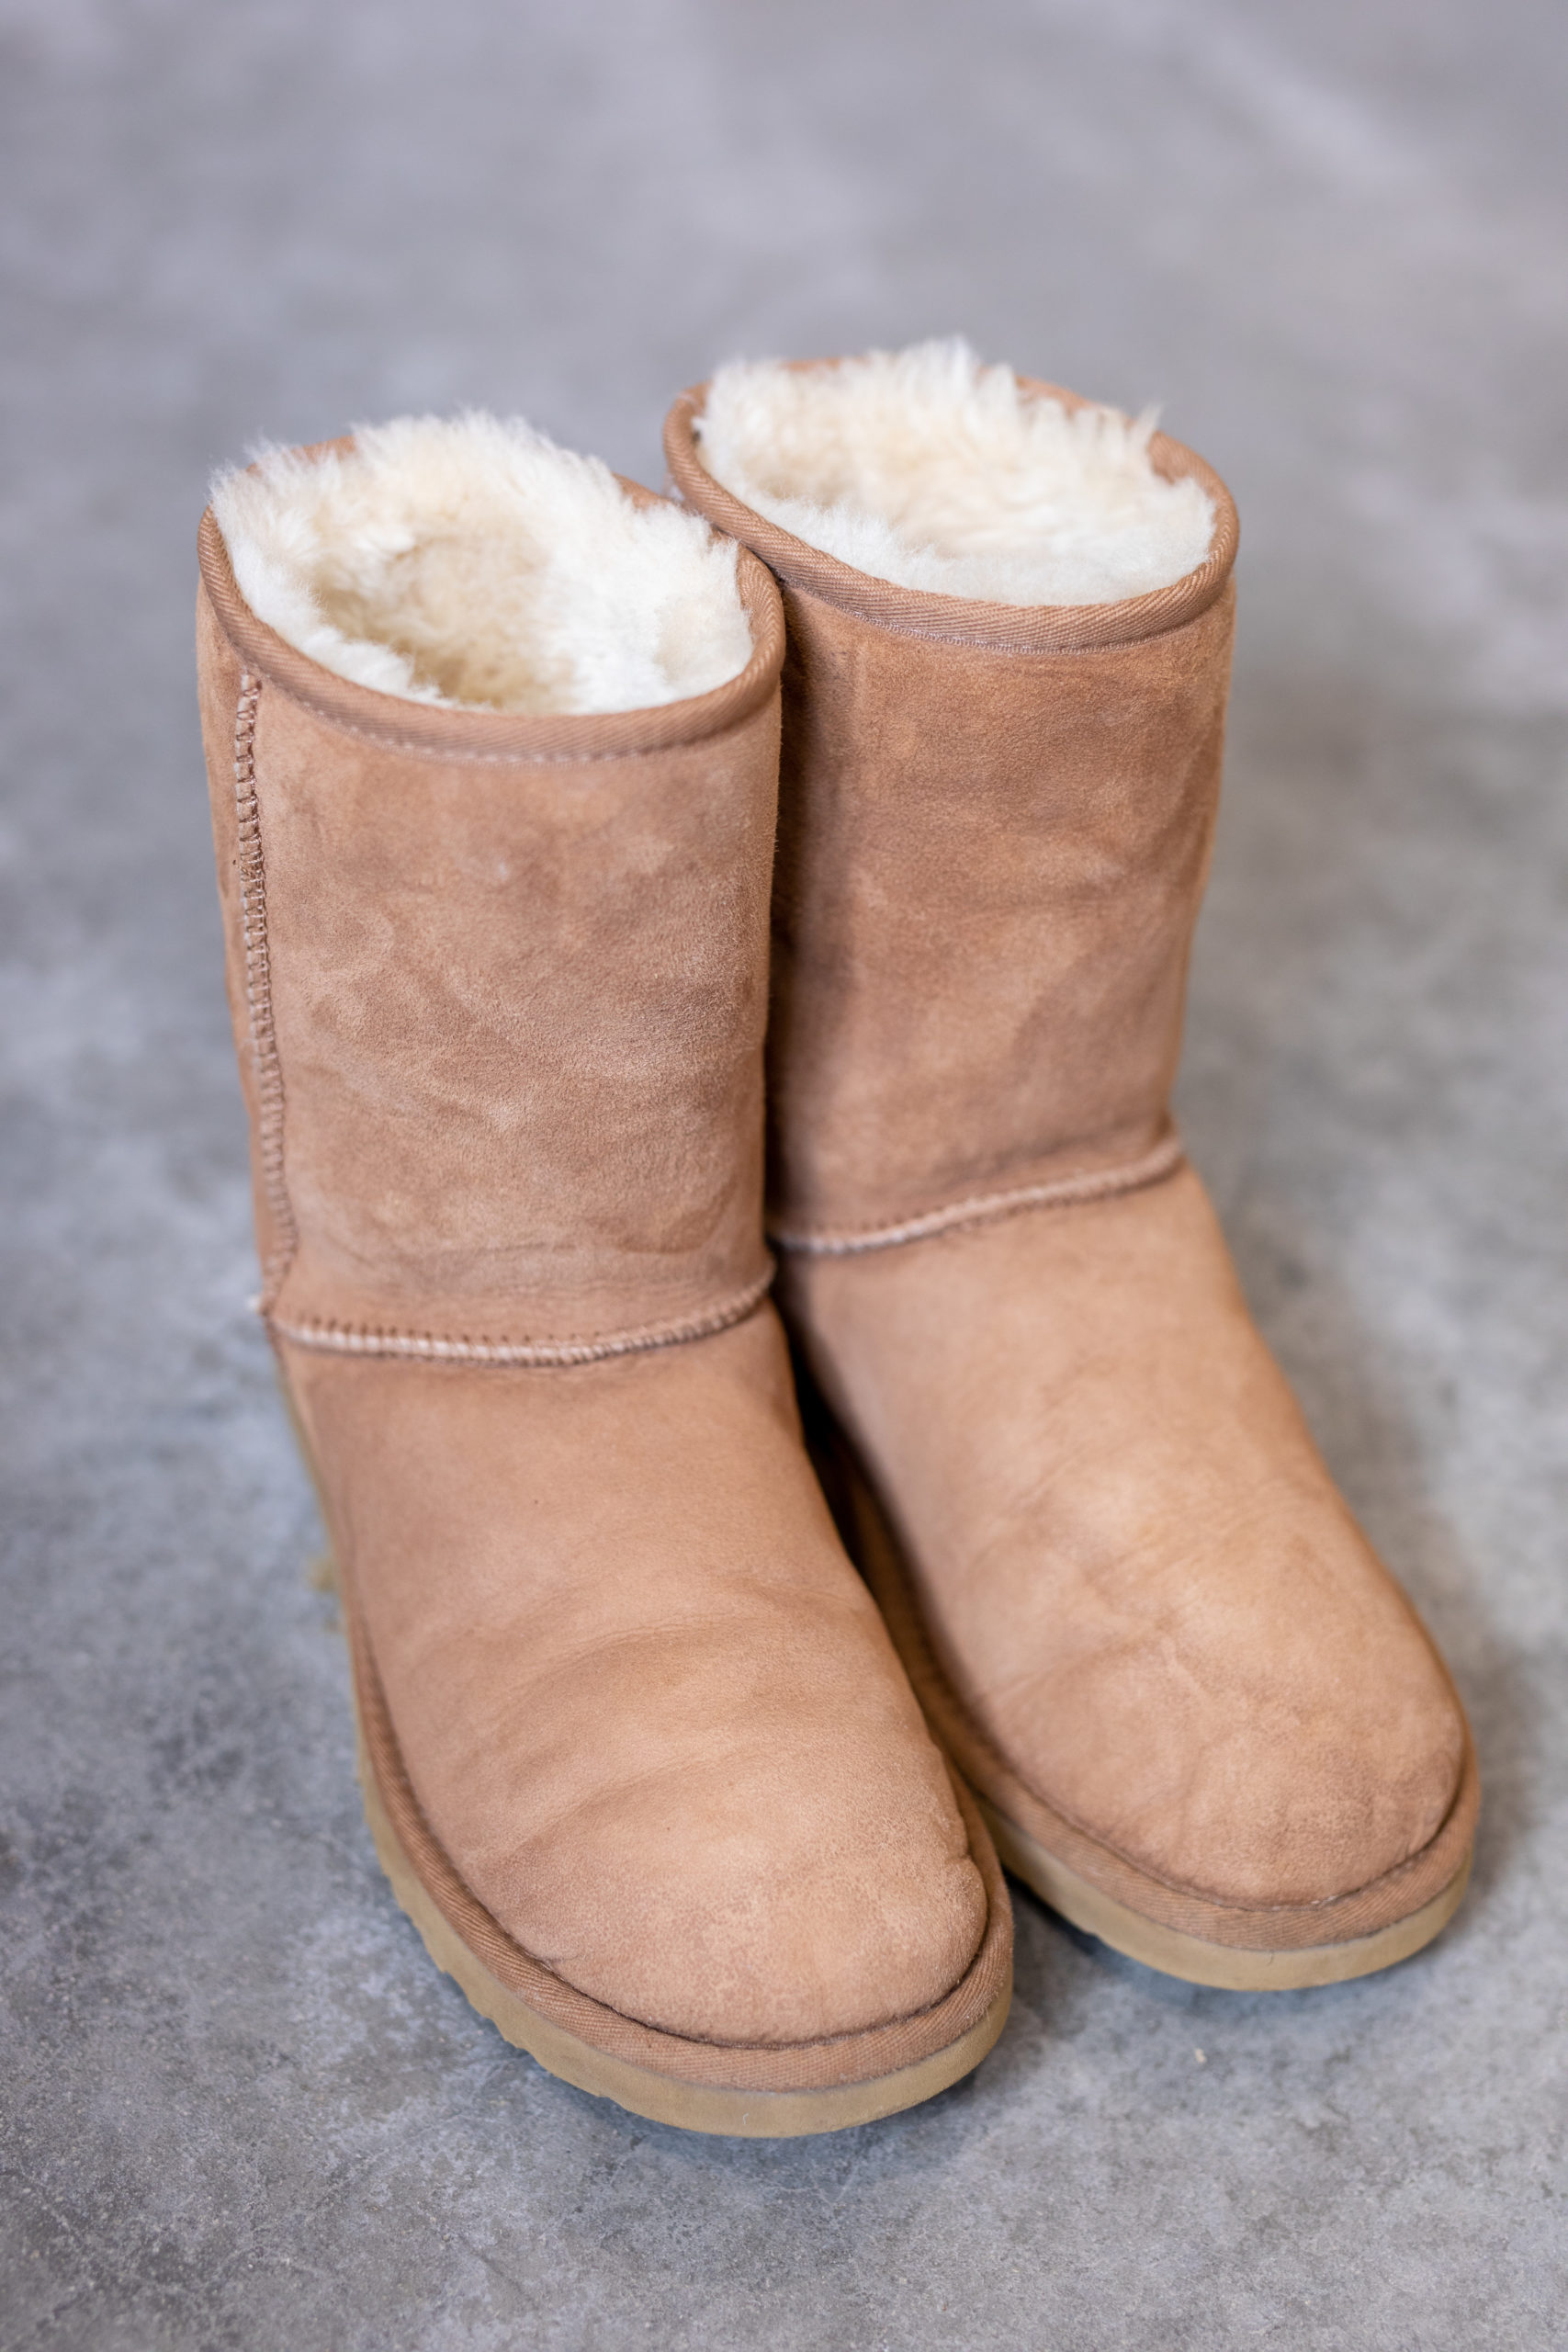 how to clean ugg insoles